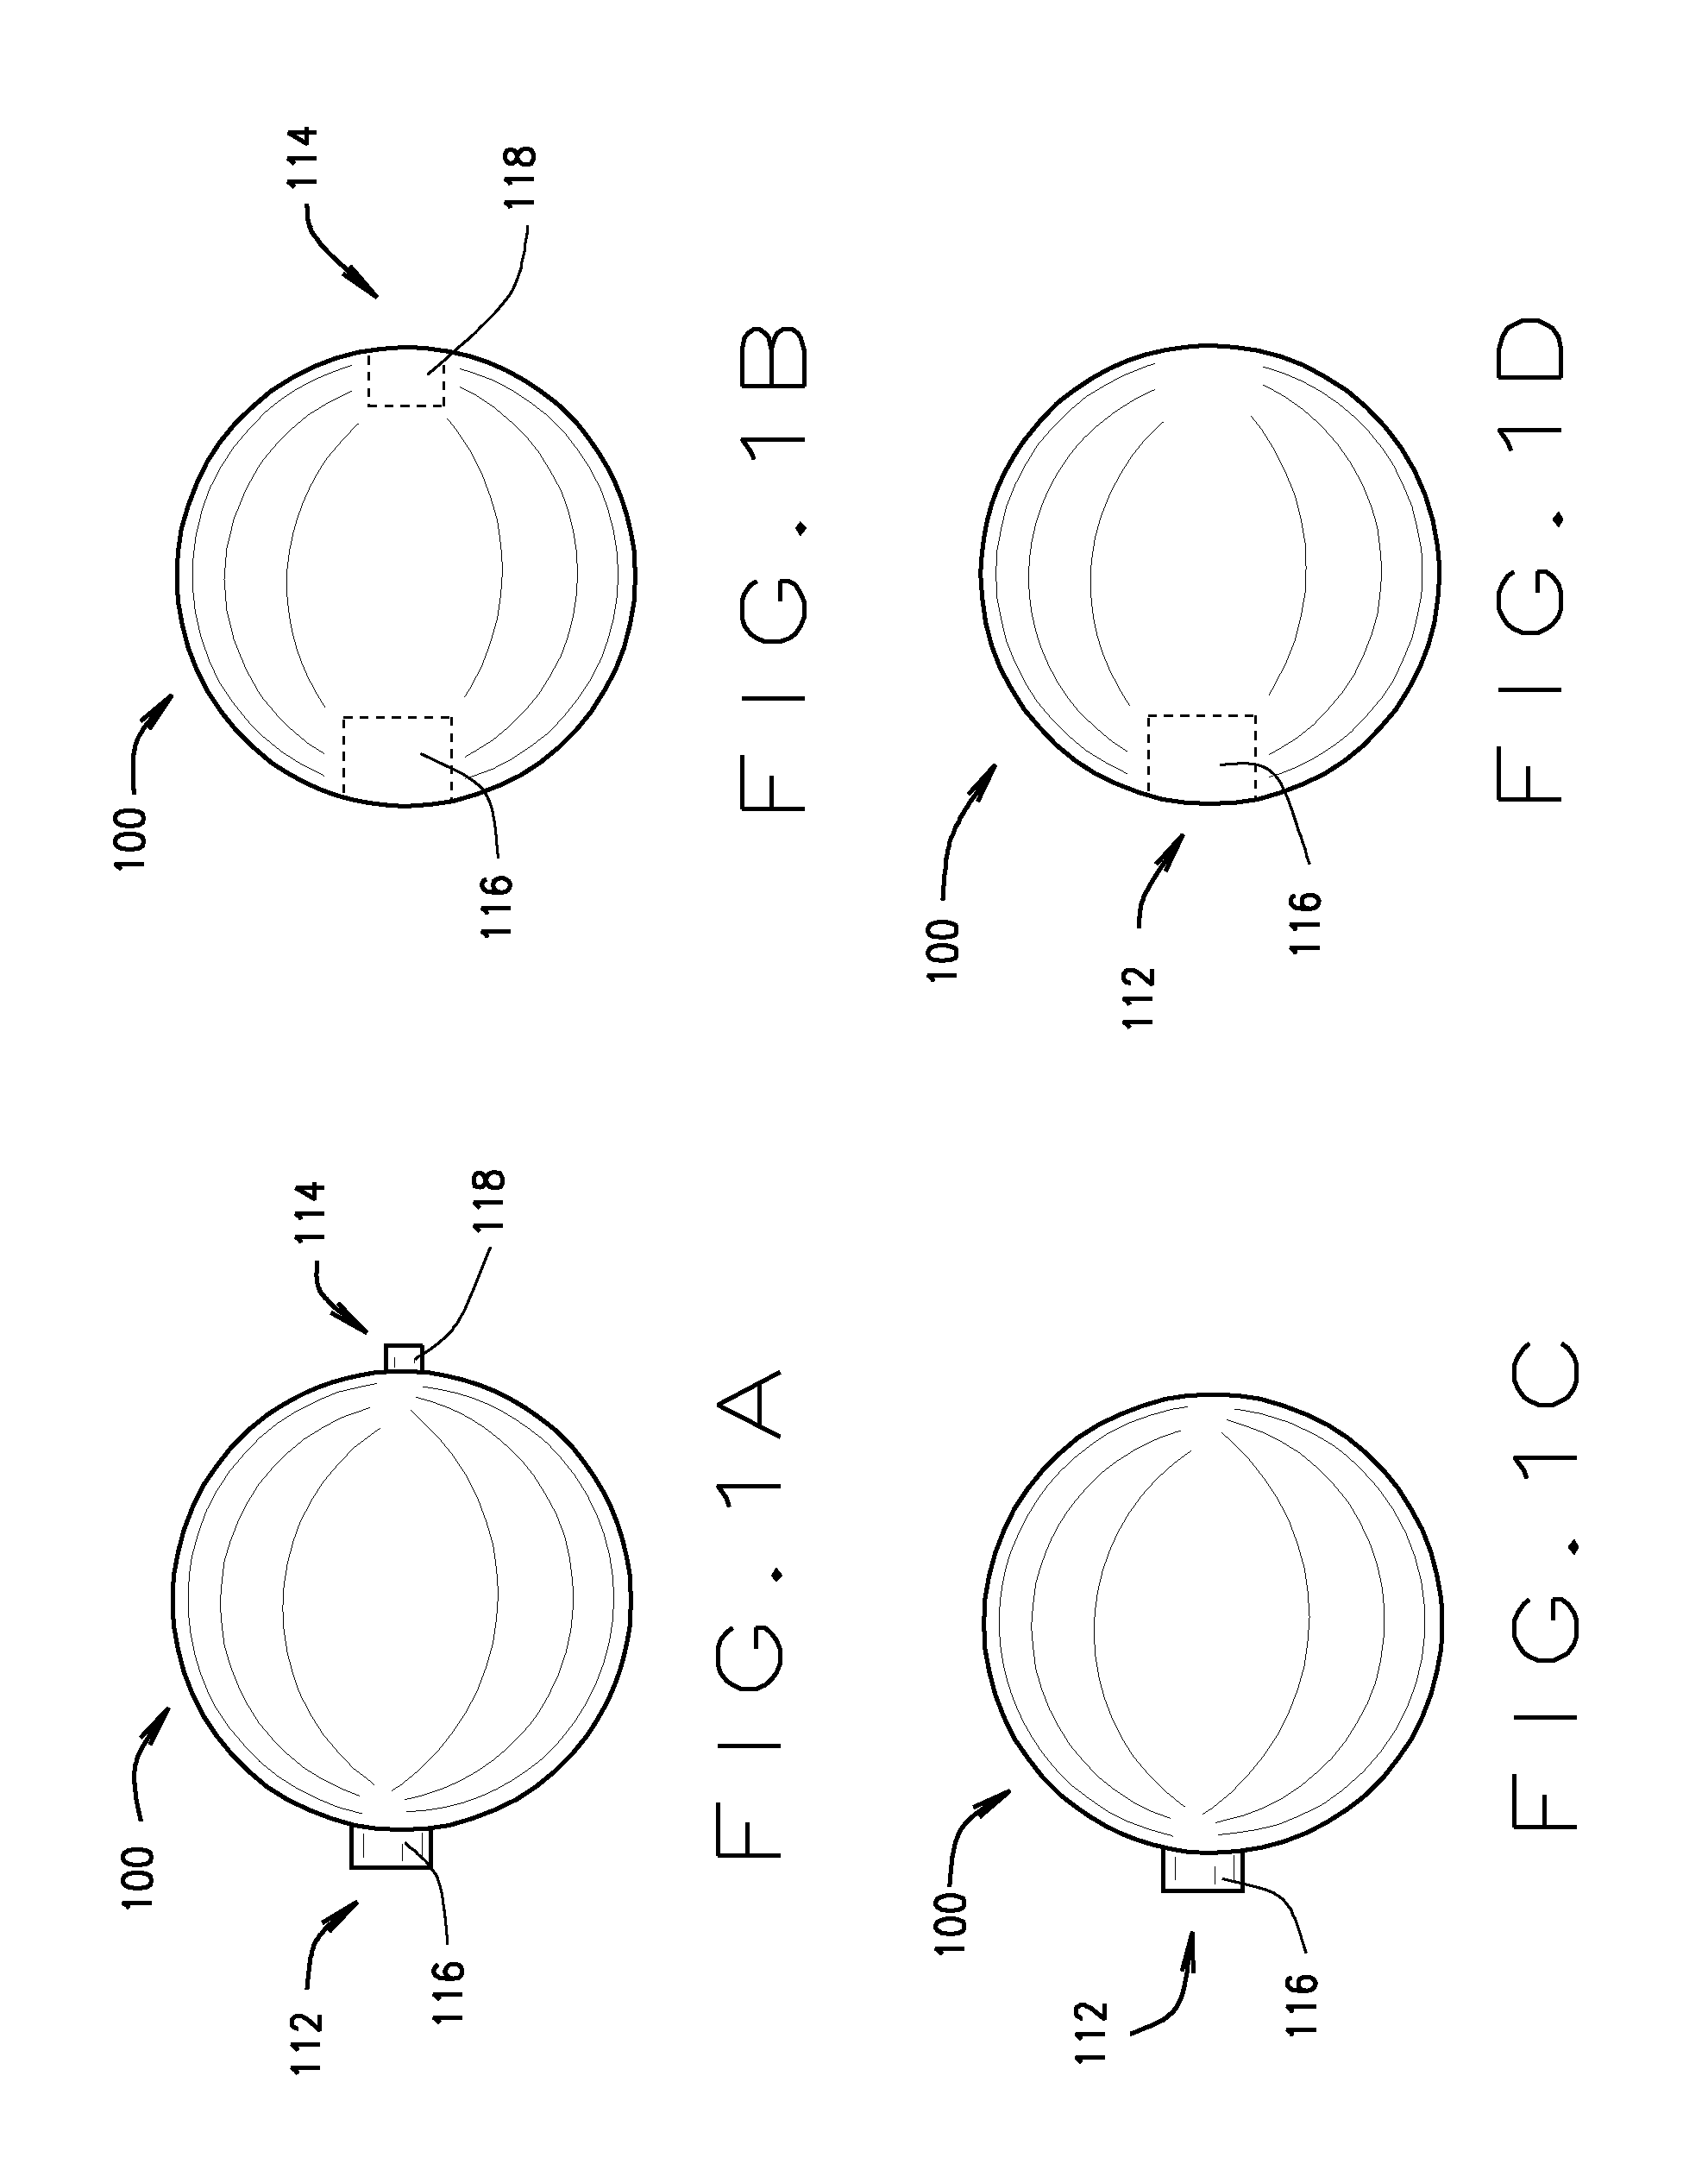 Detachable metal balloon delivery device and method